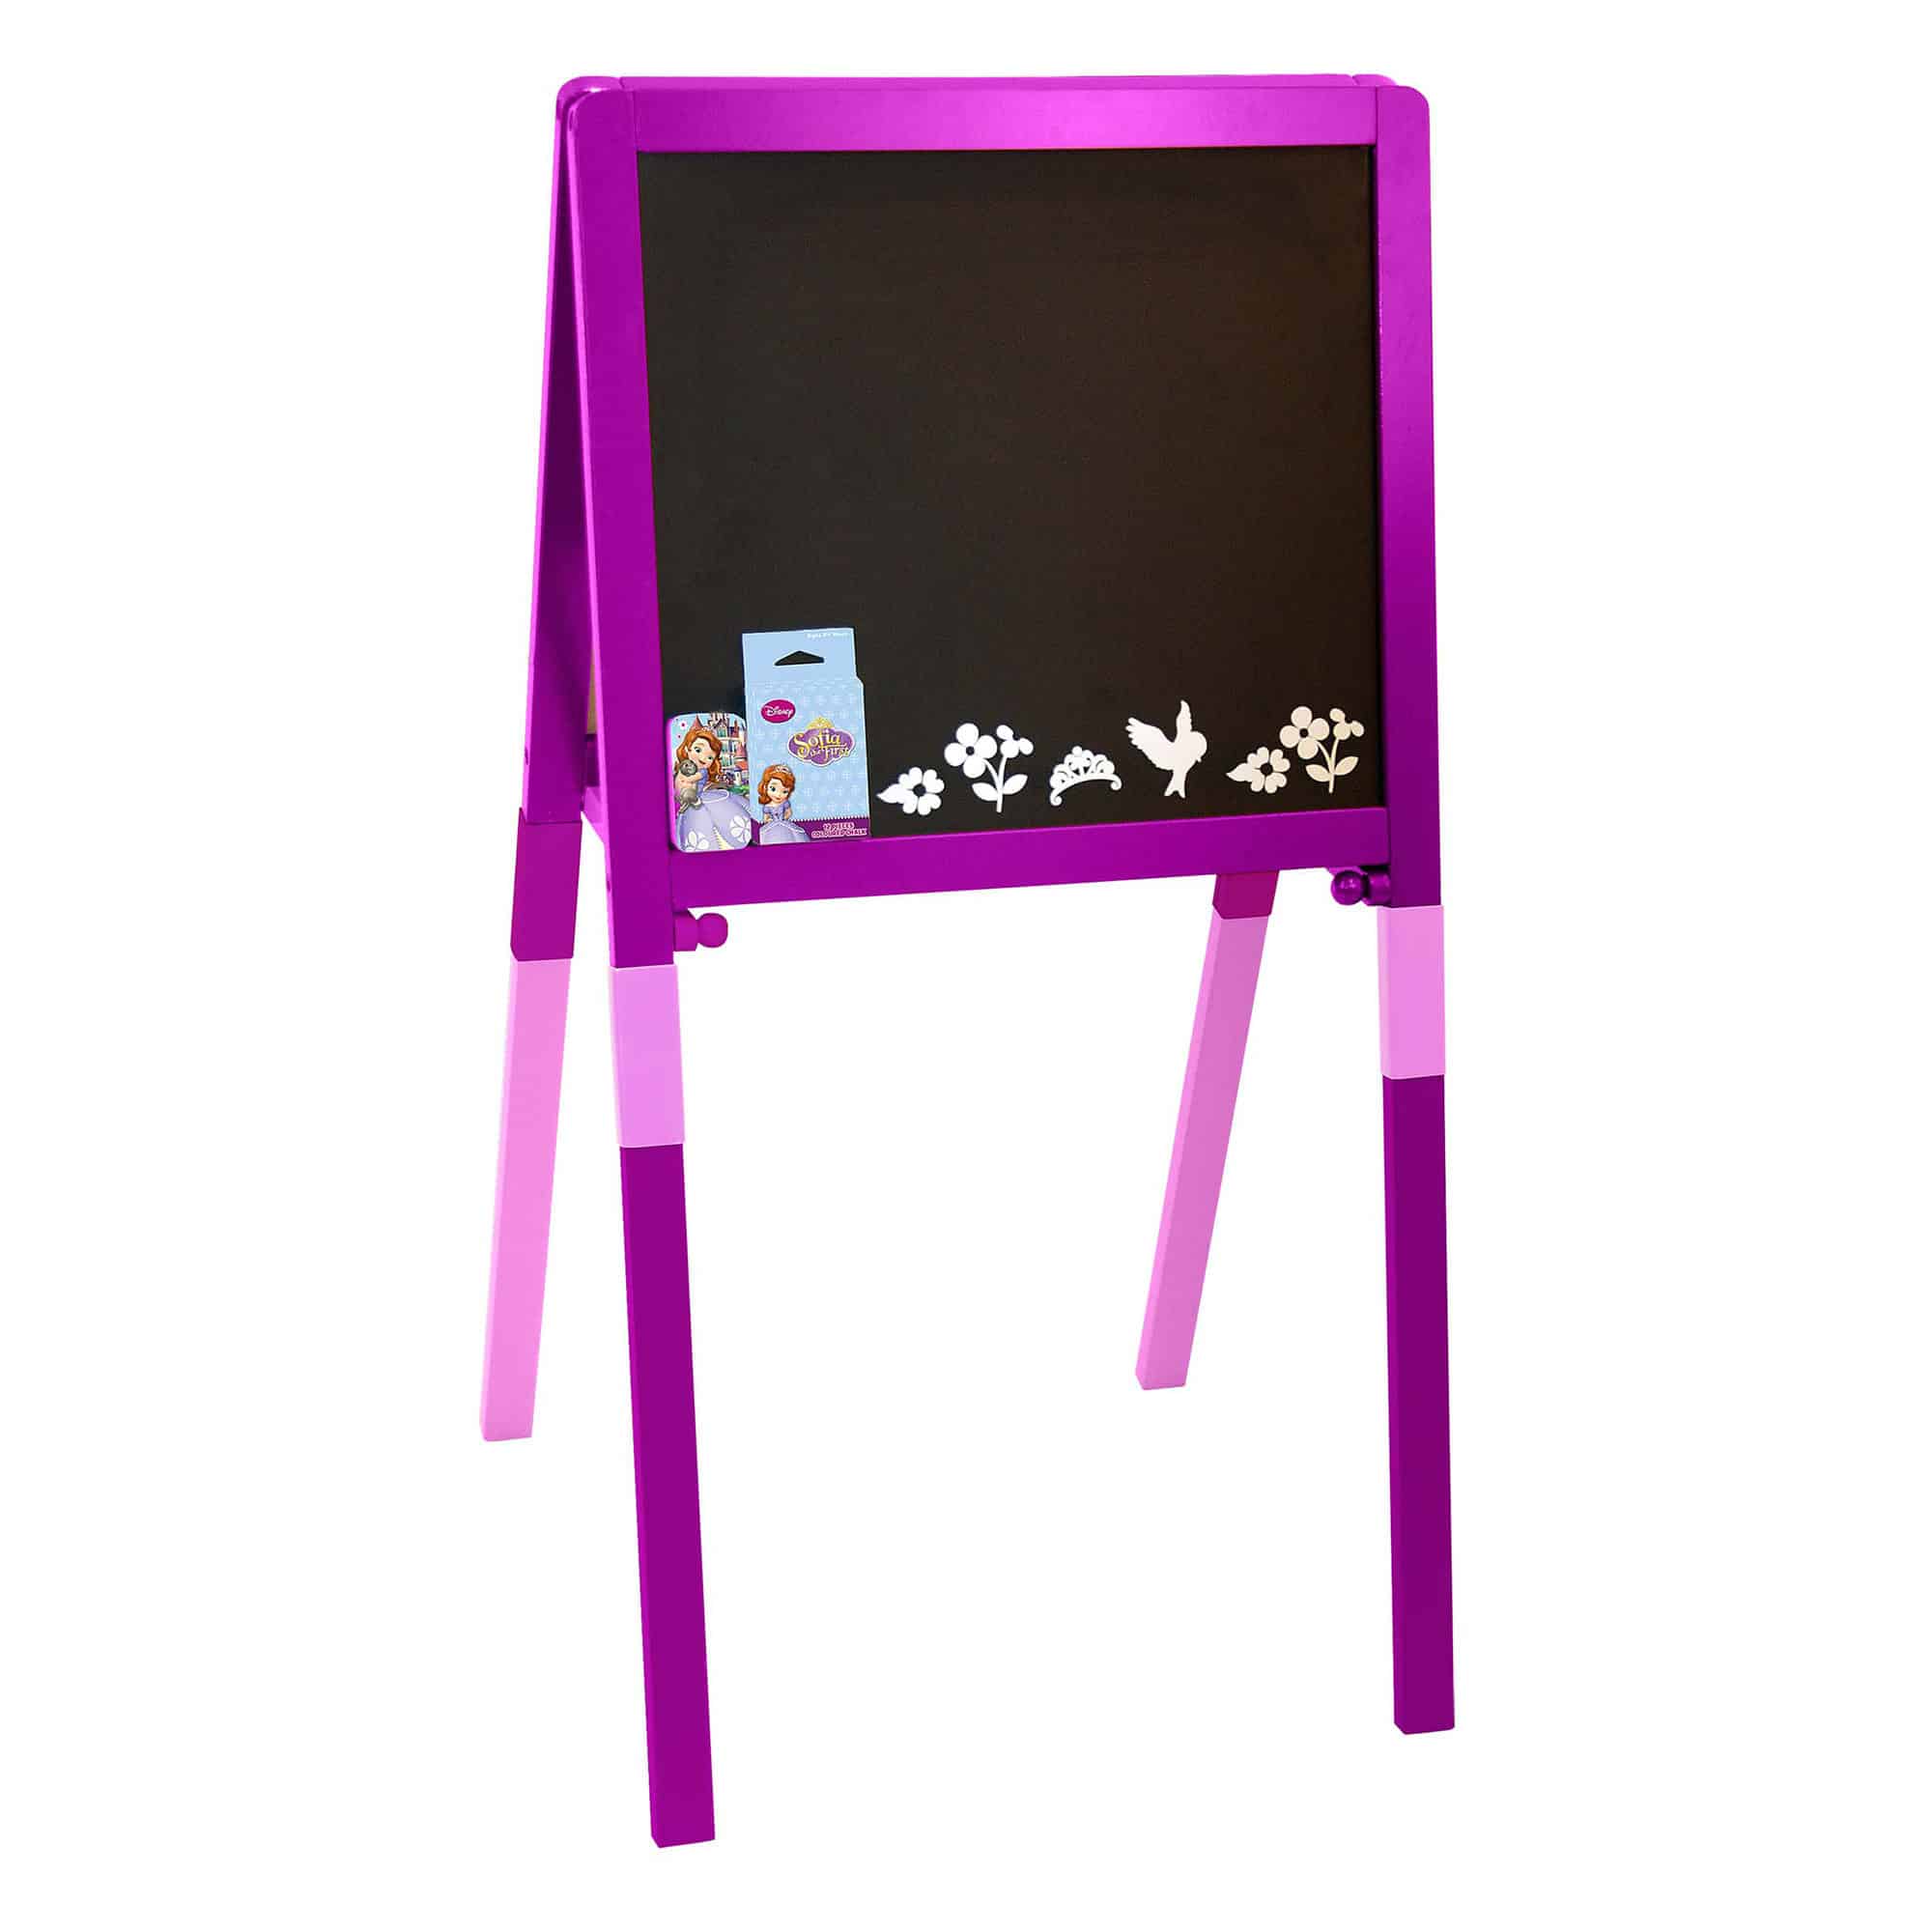 Sofia The First - Chalkboard & Whiteboard Easel with Detachable Legs